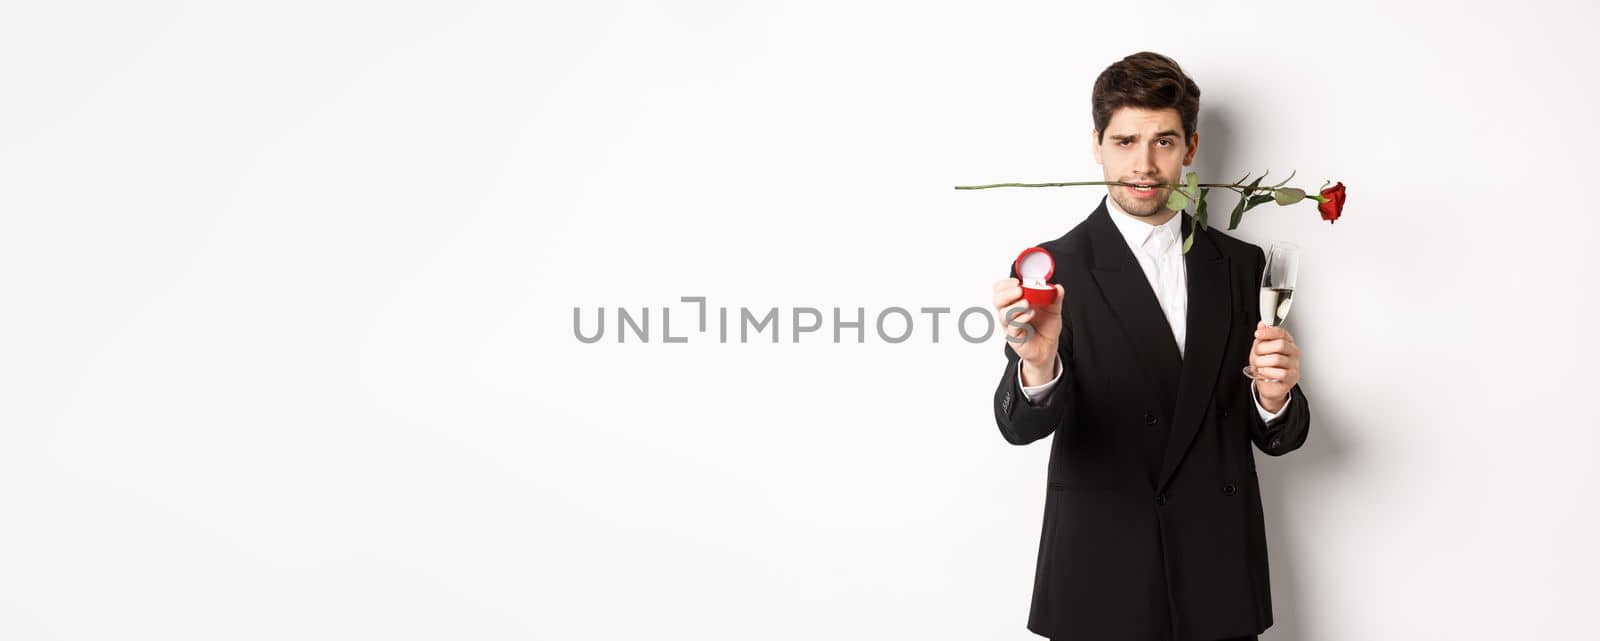 Passionate young man in suit making a proposal, holding rose in teeth and glass of champagne, showing engagement ring, asking to marry him, standing against white background.